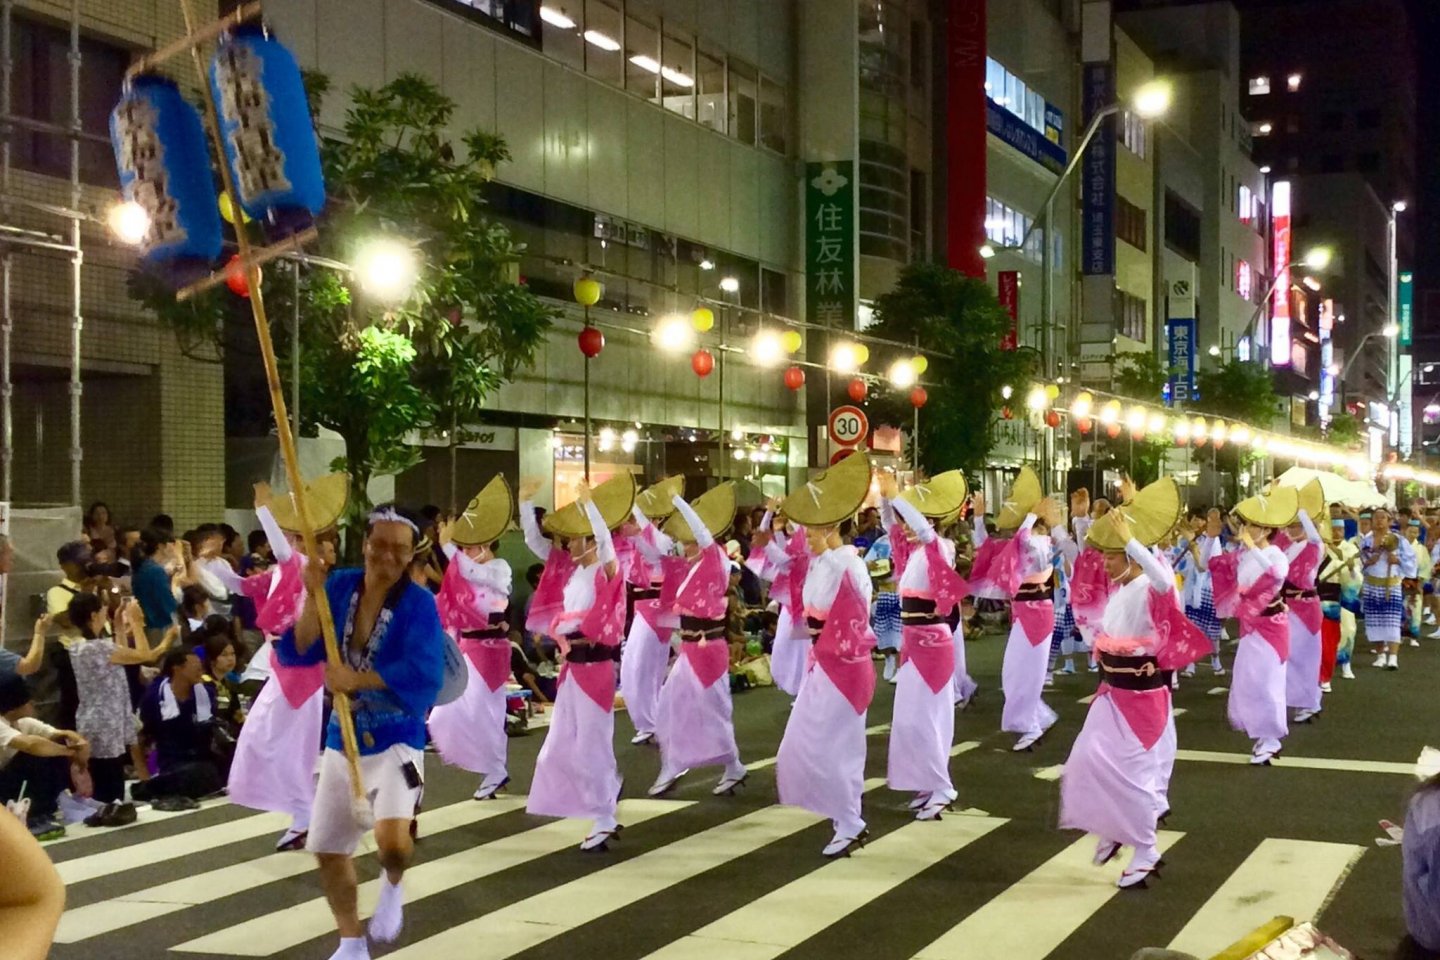 Local and Tokushima teams perform the exuberant dance moves